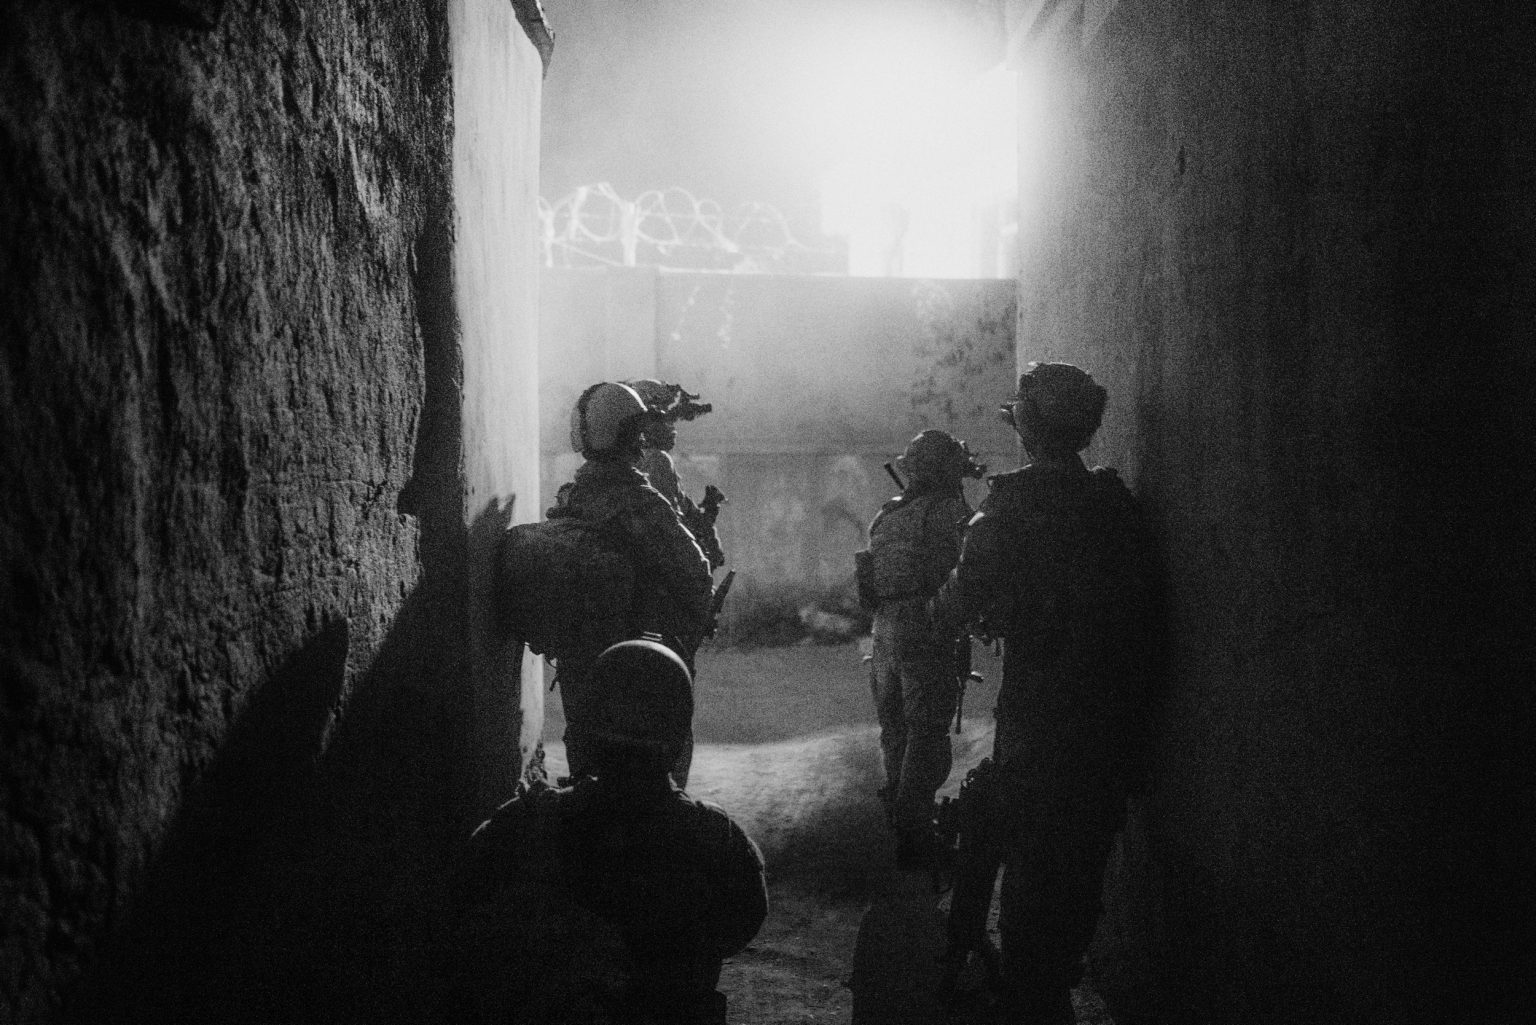 KUNDUZ, AFGHANISTAN - JULY 15, 2021:
Elite special forces unit Ð known as KKA or Afghan Special Unit Ð take shelter from gunfire during a night operation. 
After American troops began leaving Afghanistan in early May 2021 the Taliban mounted an offensive and took control of many district in northern Afghanistan. Security forces were struggling to hold the besieged city of Kunduz.

(Photo by Lorenzo Tugnoli/ Washington Post/ Contrasto)